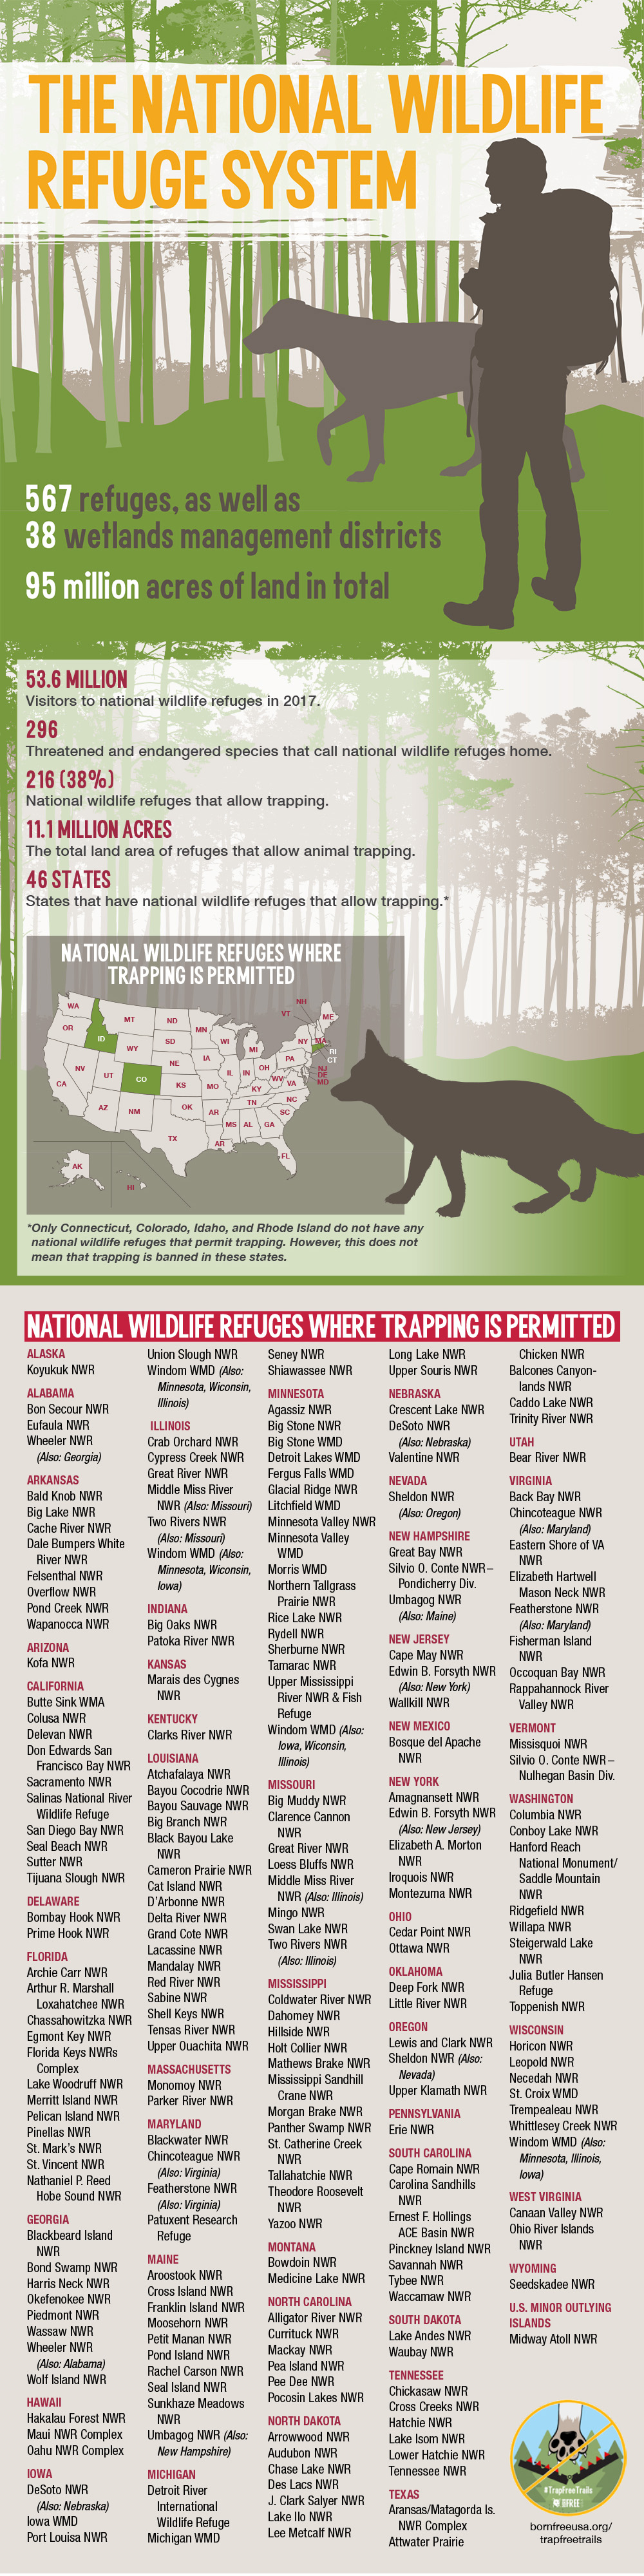 Infographic: Trapping on National Wildlife Refuges